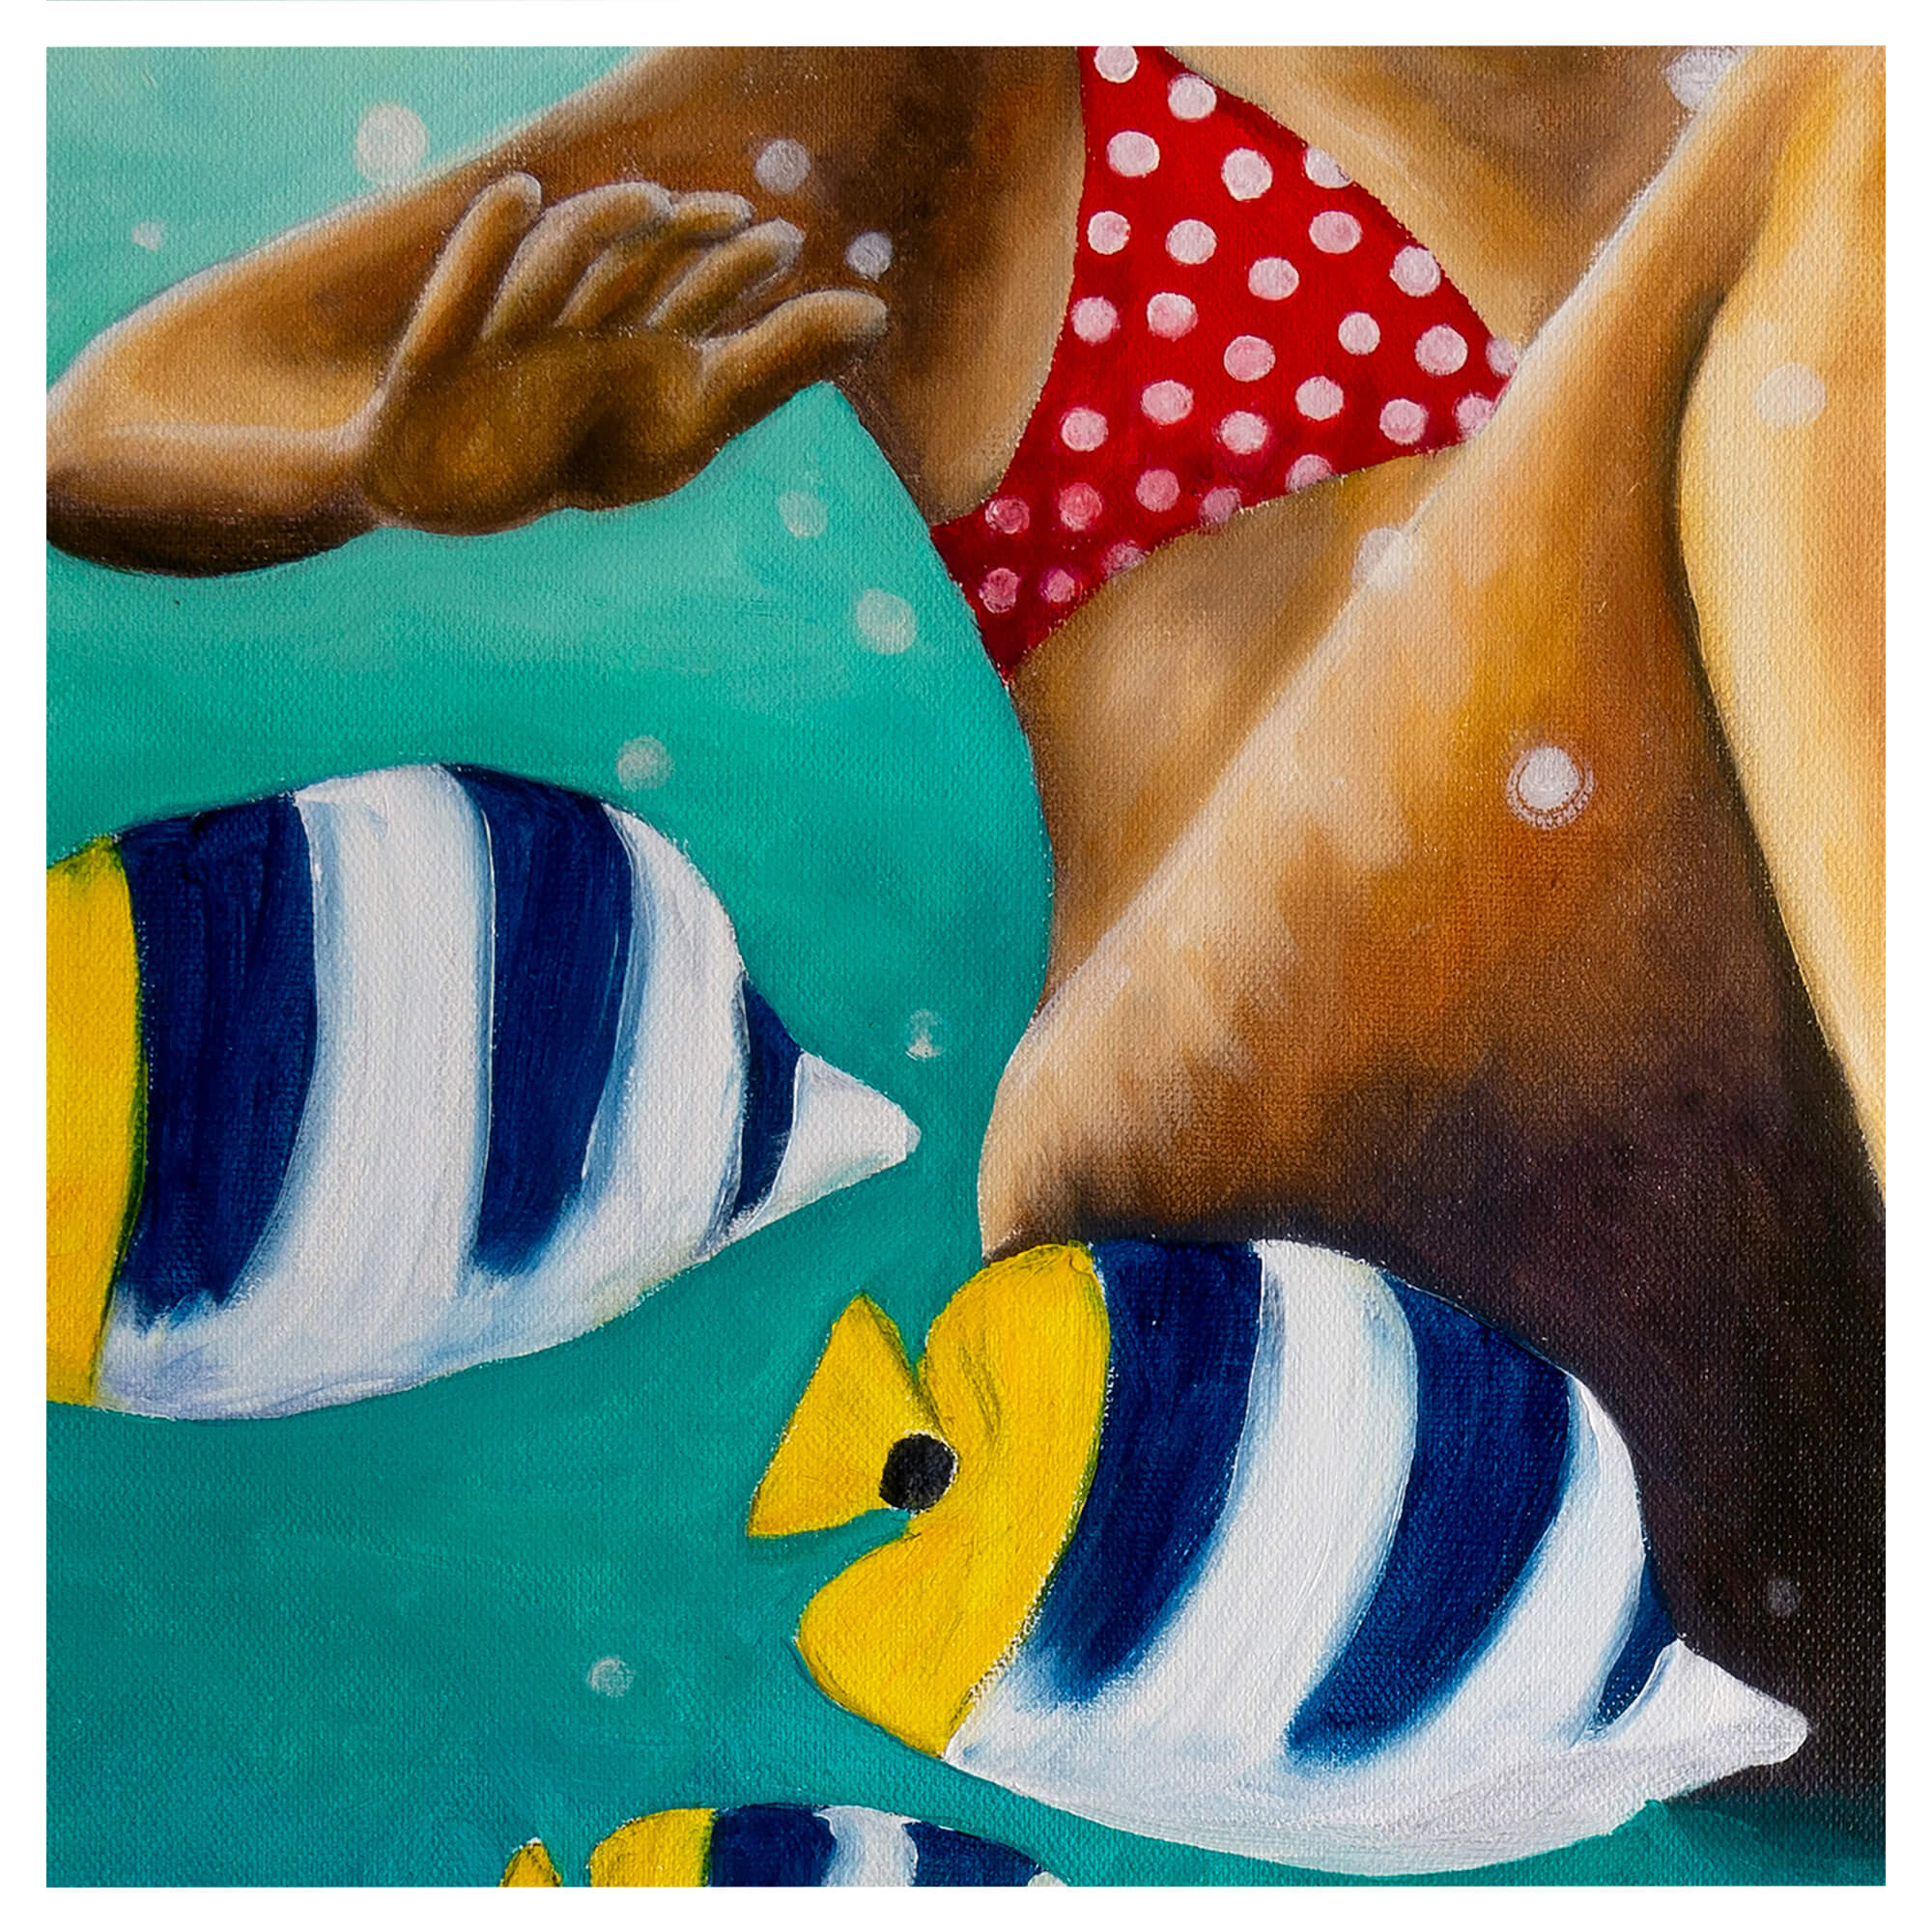 Blue and white striped fish  by hawaii artist Kelly Keane